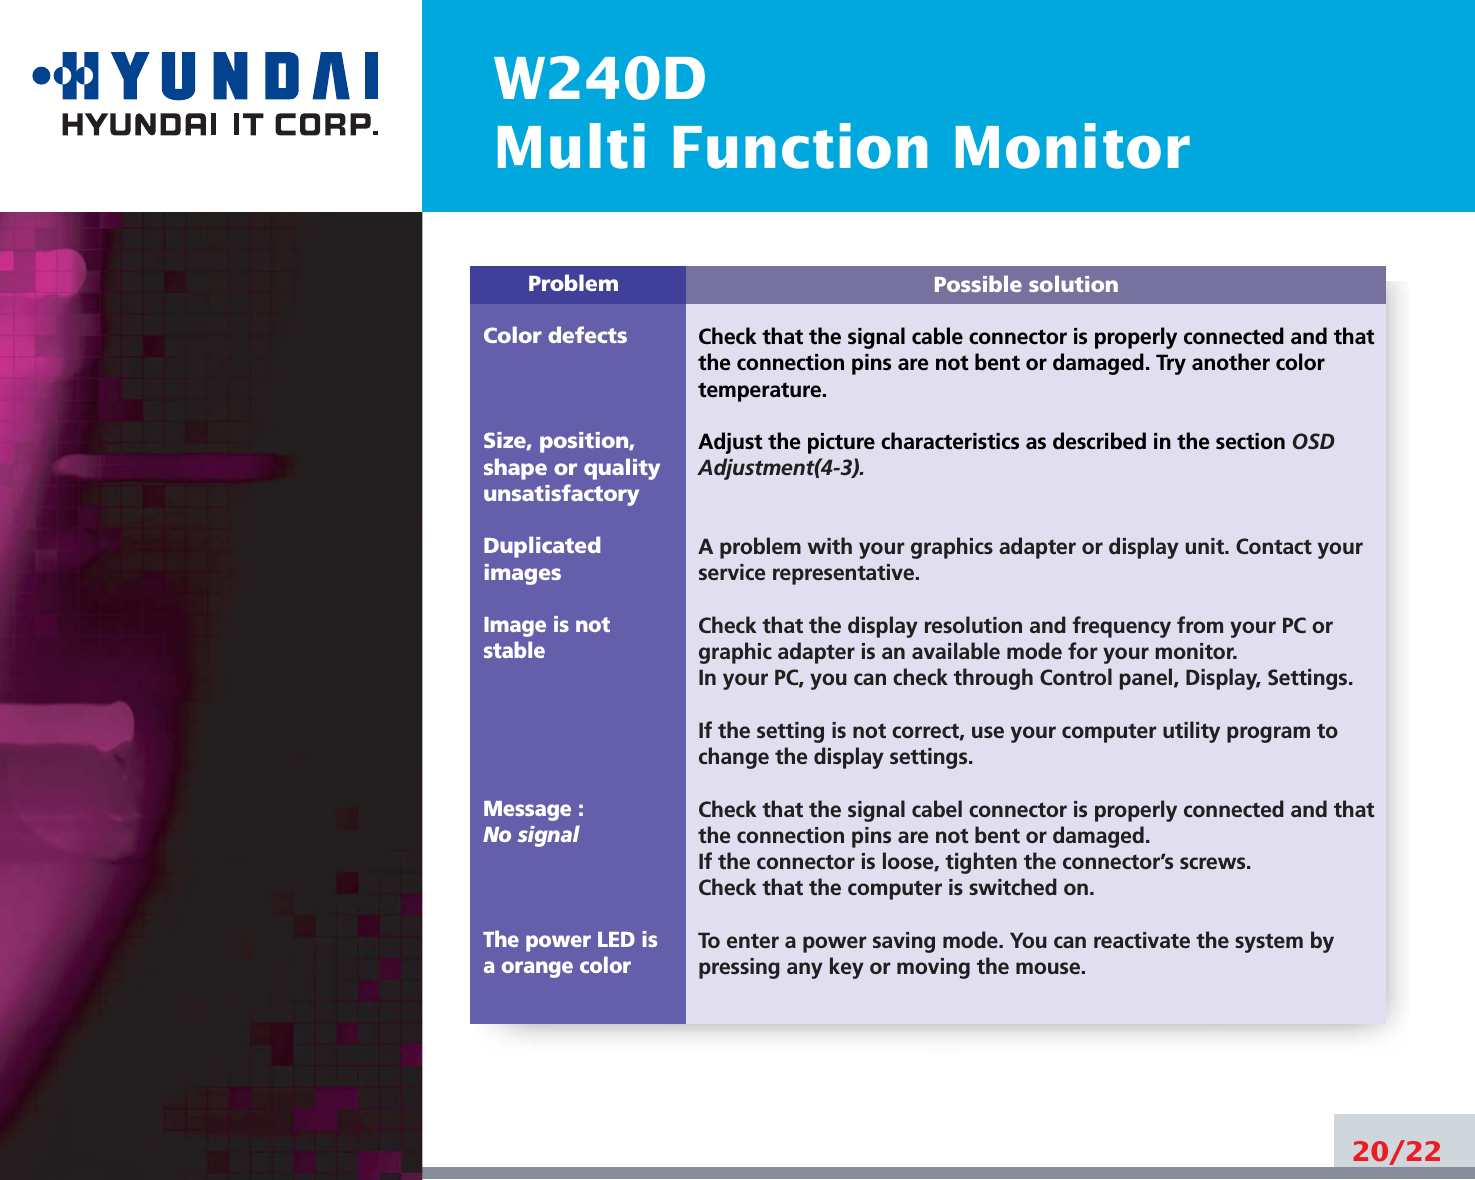 W240DMulti Function Monitor20/22Possible solutionCheck that the signal cable connector is properly connected and thatthe connection pins are not bent or damaged. Try another colortemperature. Adjust the picture characteristics as described in the section OSDAdjustment(4-3).A problem with your graphics adapter or display unit. Contact yourservice representative.Check that the display resolution and frequency from your PC orgraphic adapter is an available mode for your monitor.In your PC, you can check through Control panel, Display, Settings.If the setting is not correct, use your computer utility program tochange the display settings.Check that the signal cabel connector is properly connected and thatthe connection pins are not bent or damaged.If the connector is loose, tighten the connector’s screws.Check that the computer is switched on.To enter a power saving mode. You can reactivate the system bypressing any key or moving the mouse.ProblemColor defectsSize, position,shape or qualityunsatisfactoryDuplicatedimagesImage is notstableMessage : No signalThe power LED isa orange color